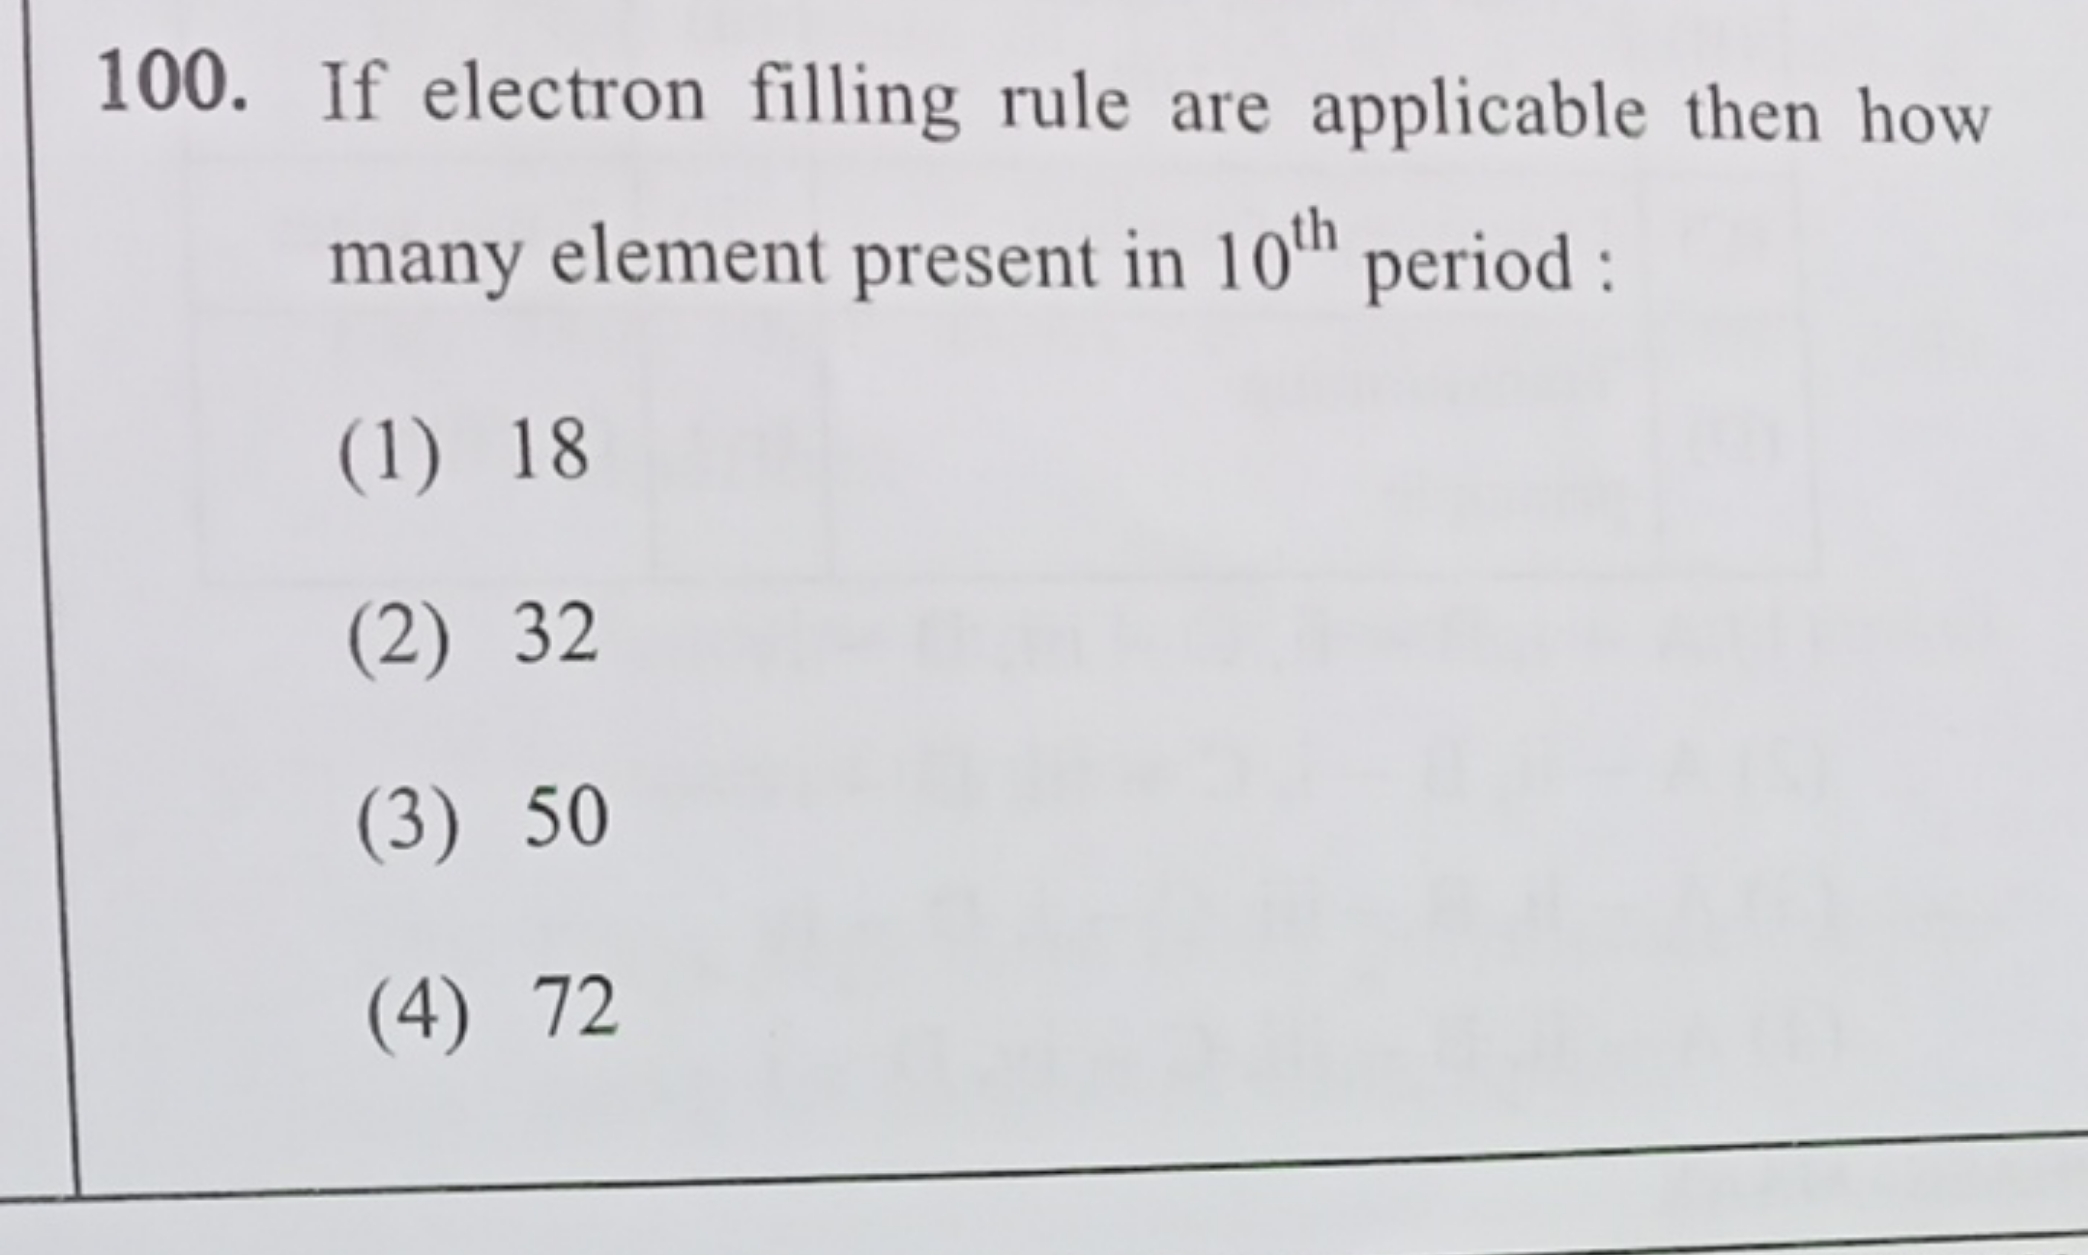 If electron filling rule are applicable then how many element present 